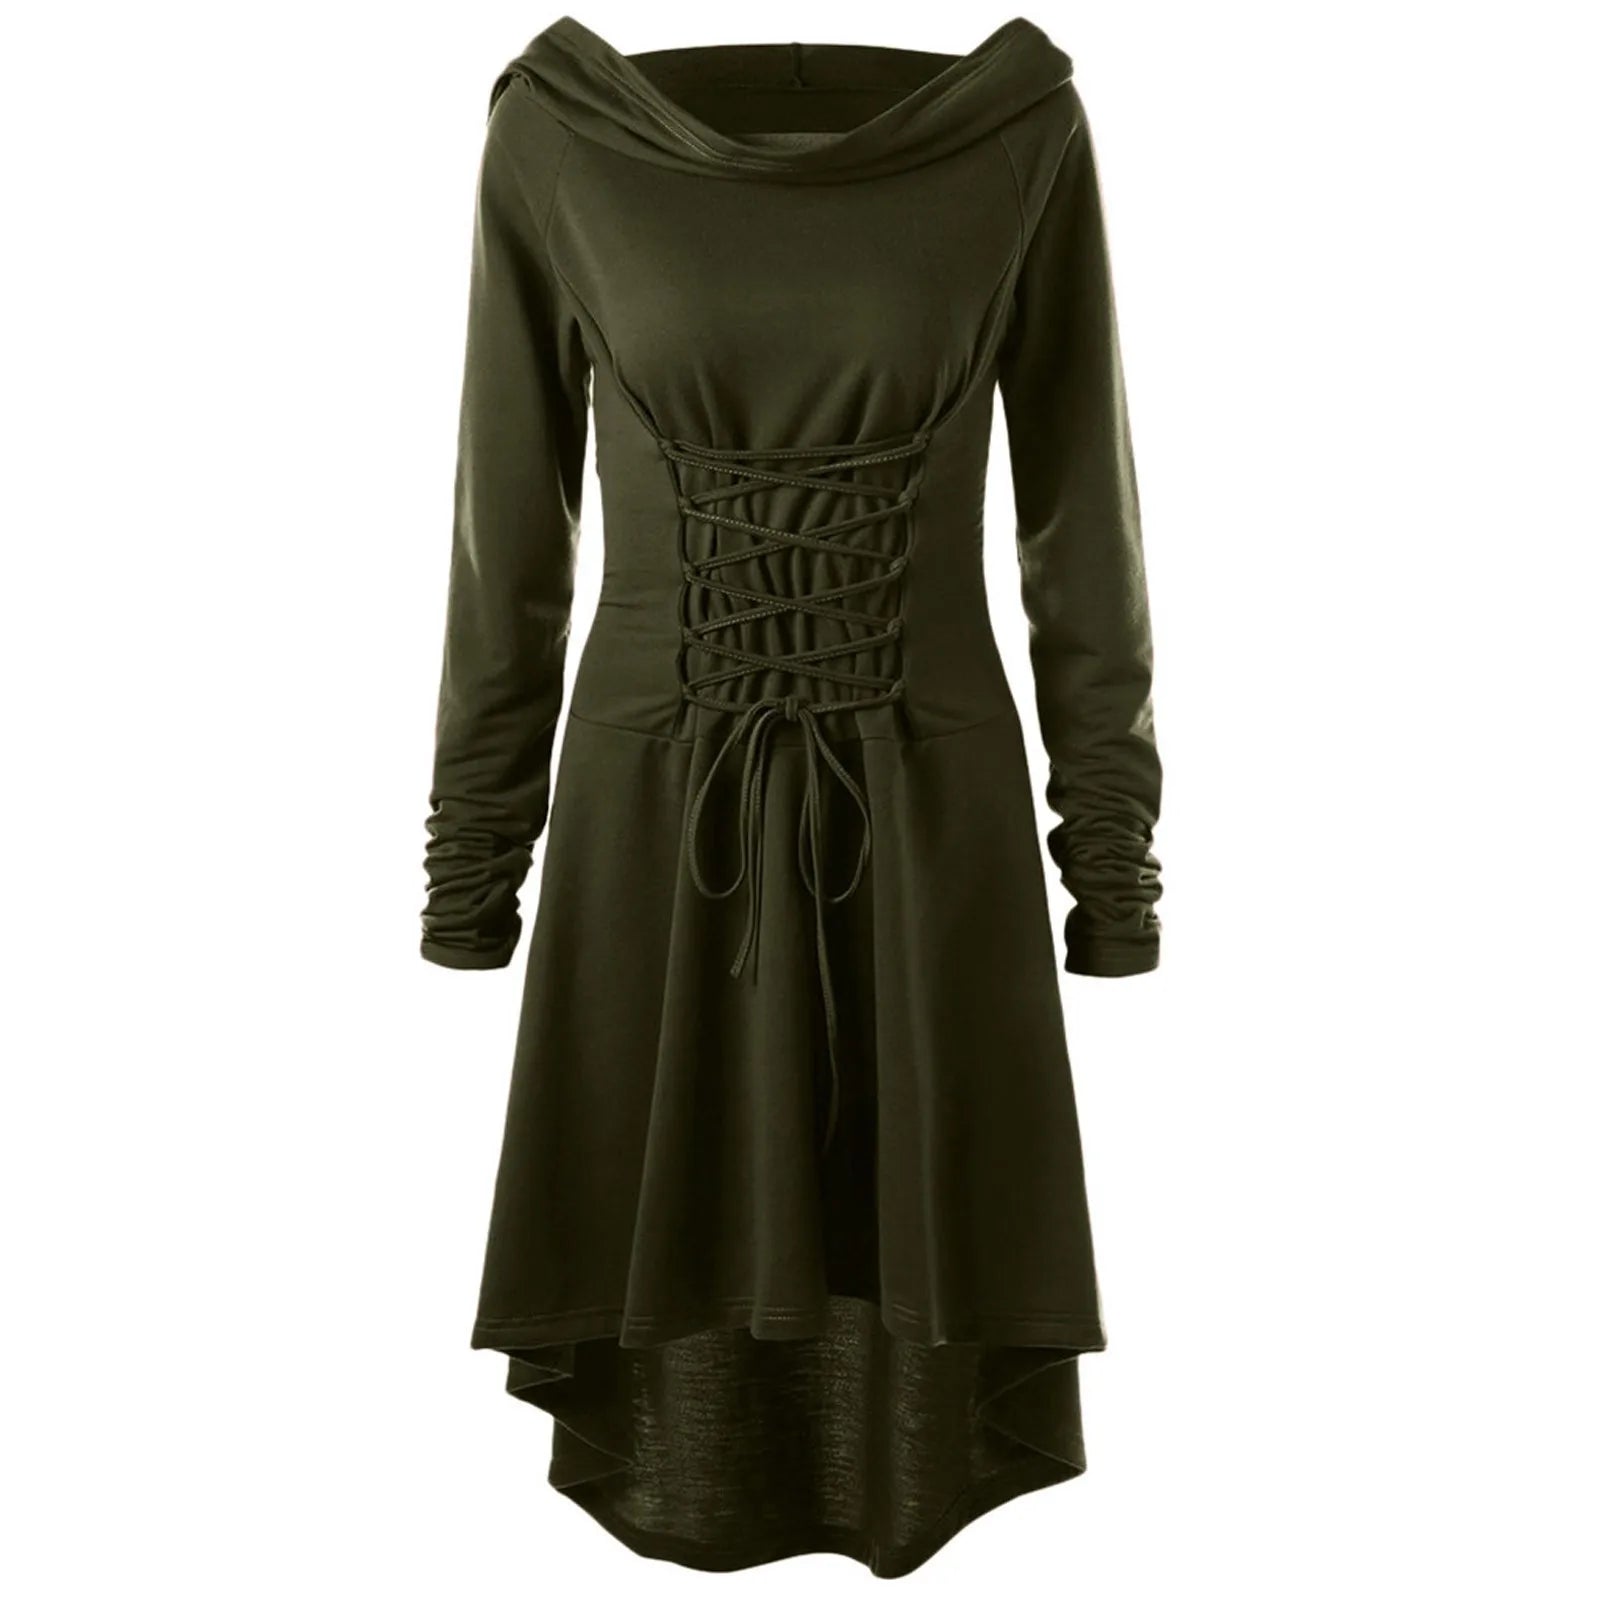 Women’s Solid Color Festival Dress with Long Sleeves and Hood